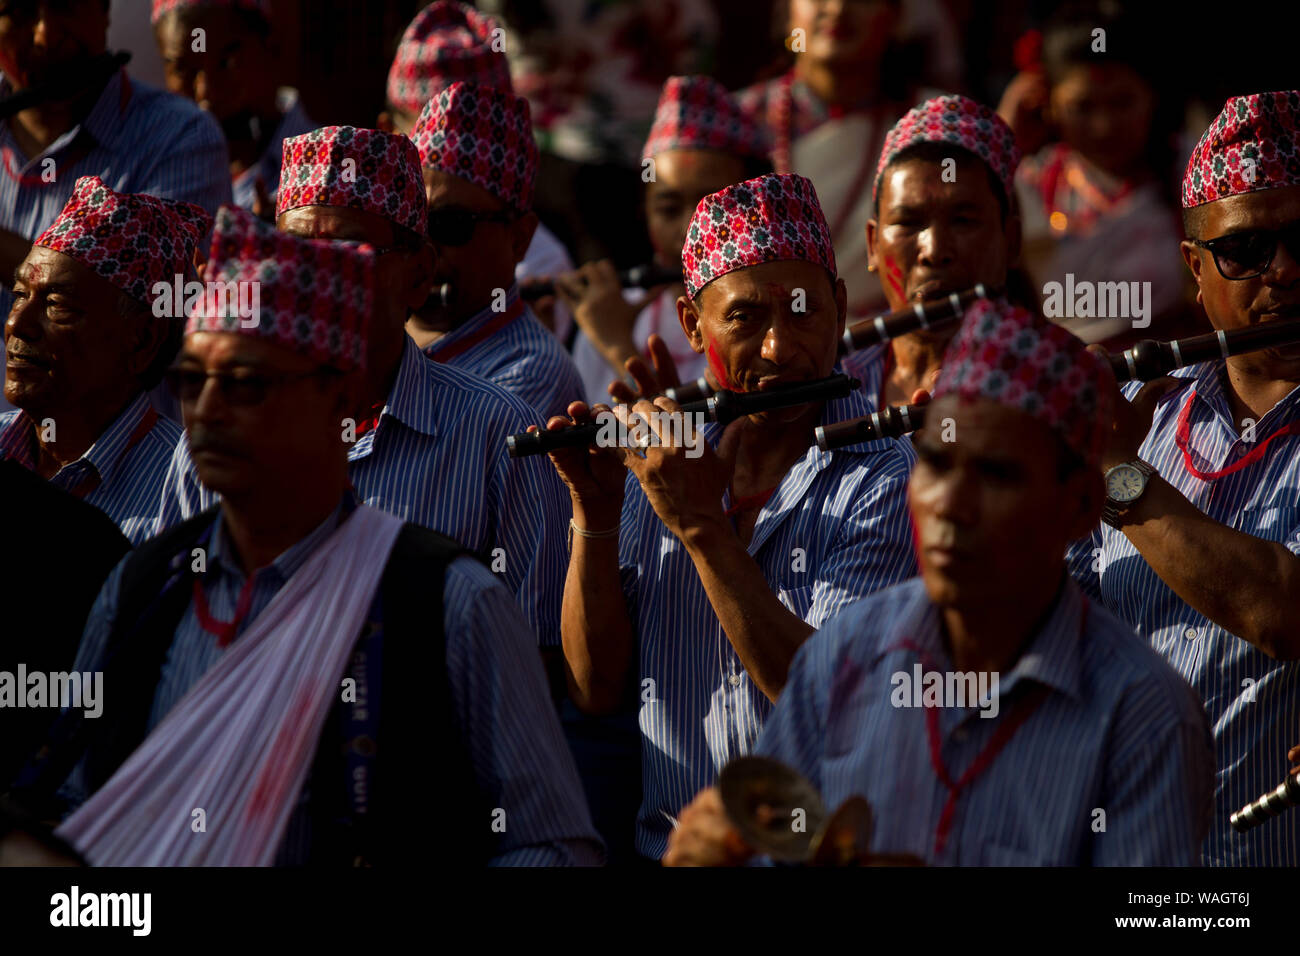 Lalitpur, Nepal. 20th Aug, 2019. Men from ethnic Newar community in traditional attire play the flute during Ganesh Puja Festival at Patan Durbar Square in Lalitpur, Nepal, Aug. 20, 2019. Credit: Sulav Shrestha/Xinhua Stock Photo